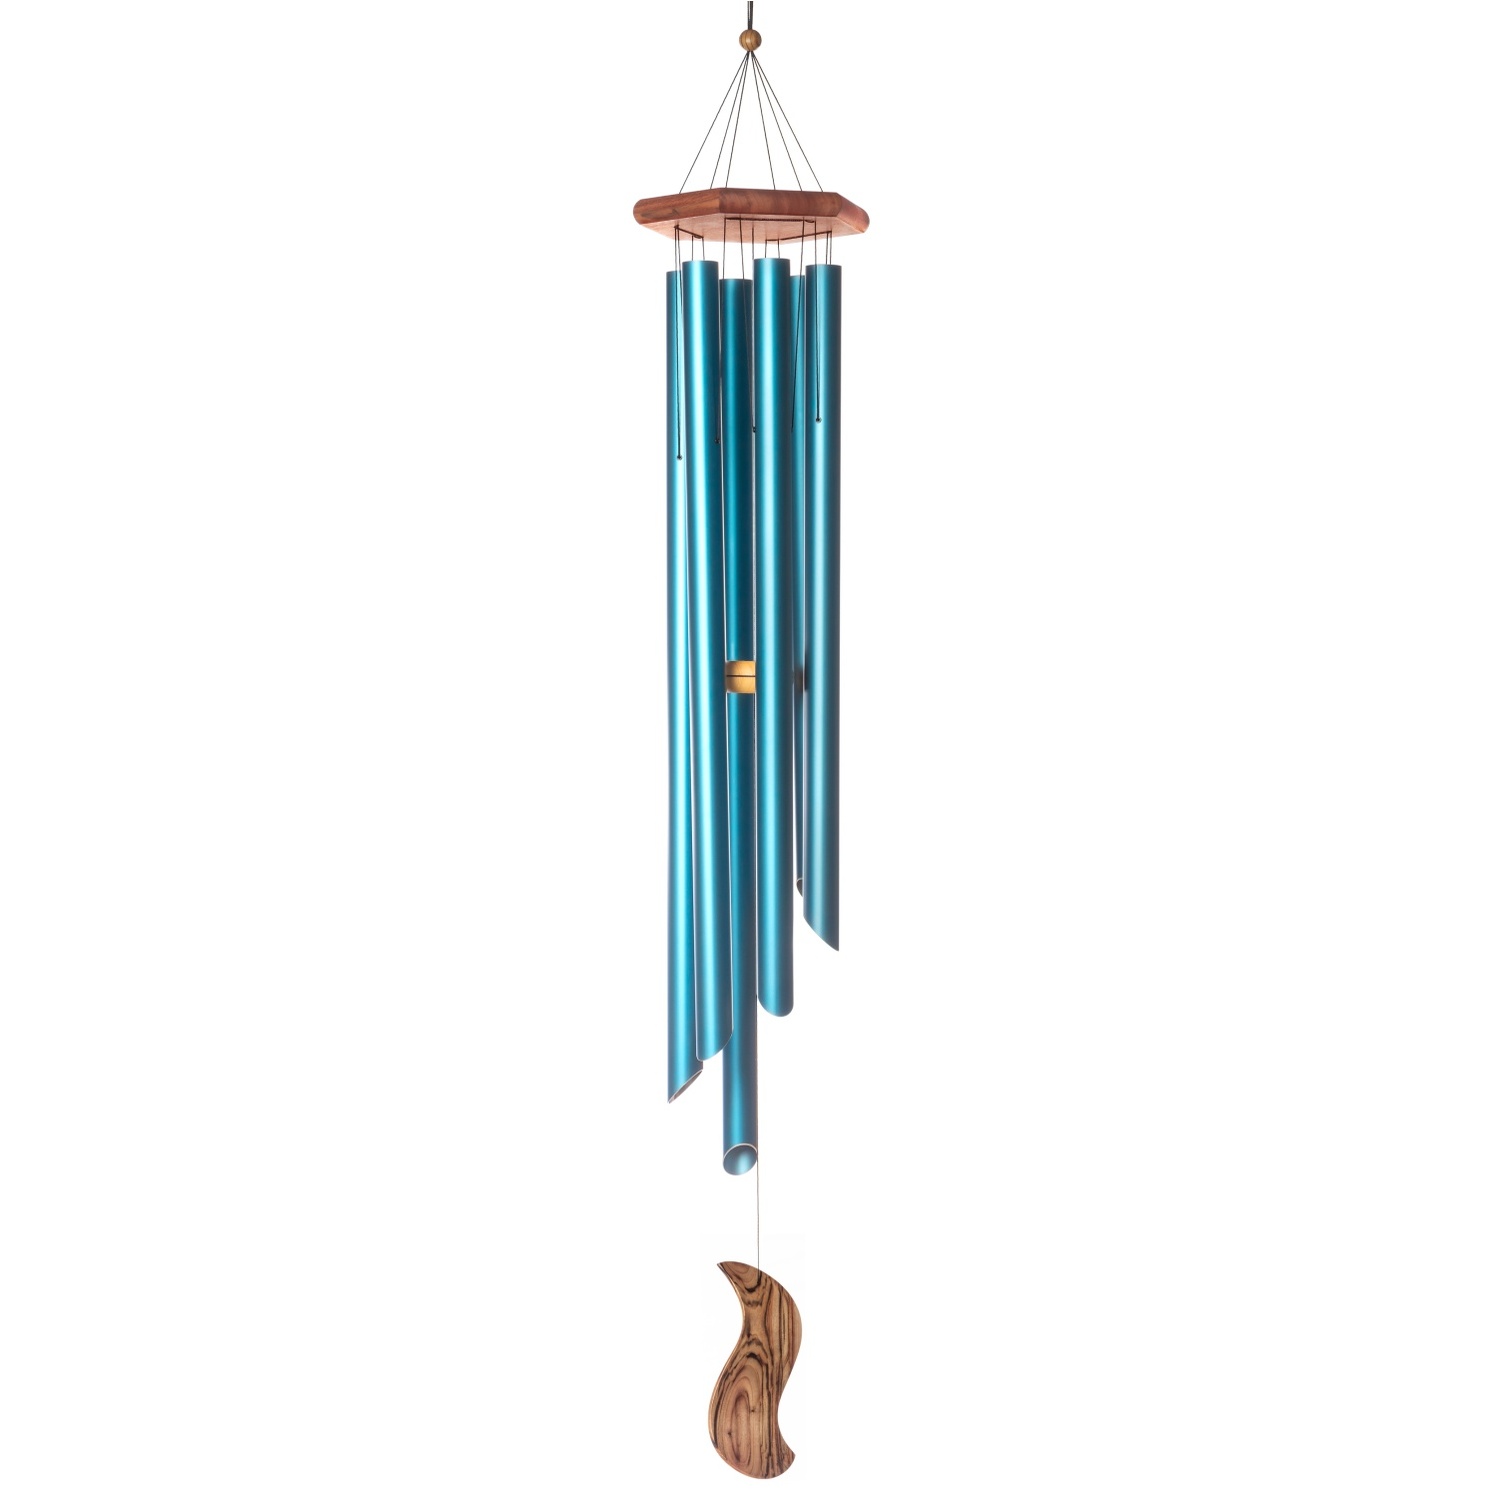 Extra large blue Abbey wind chime with handmade blue gum top and 6 polished organ fluted pipe ends